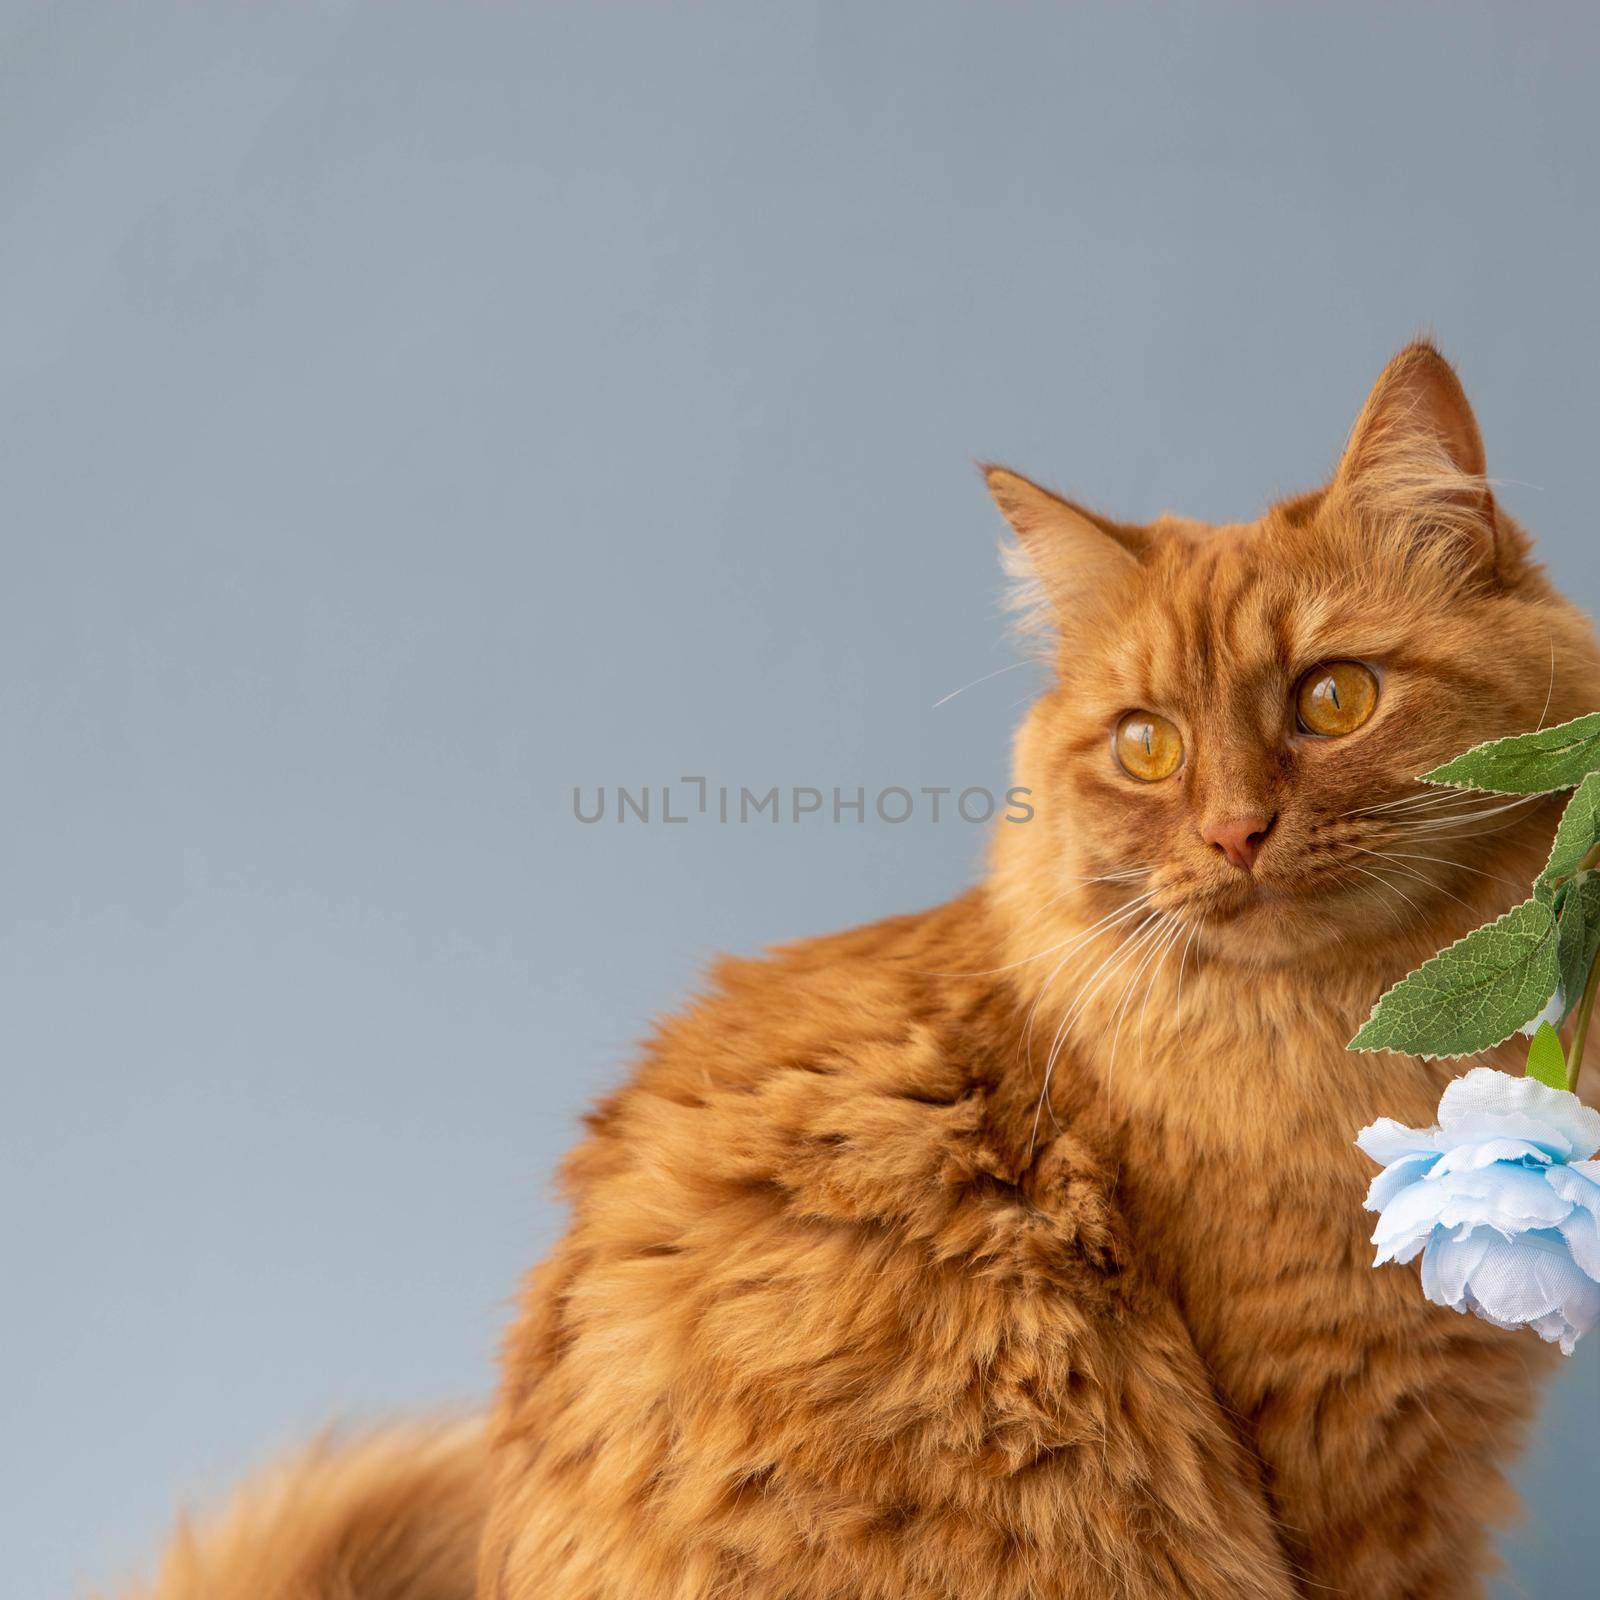 A big red cat looks to the side next to a blue flower on a blue background is a place for text.